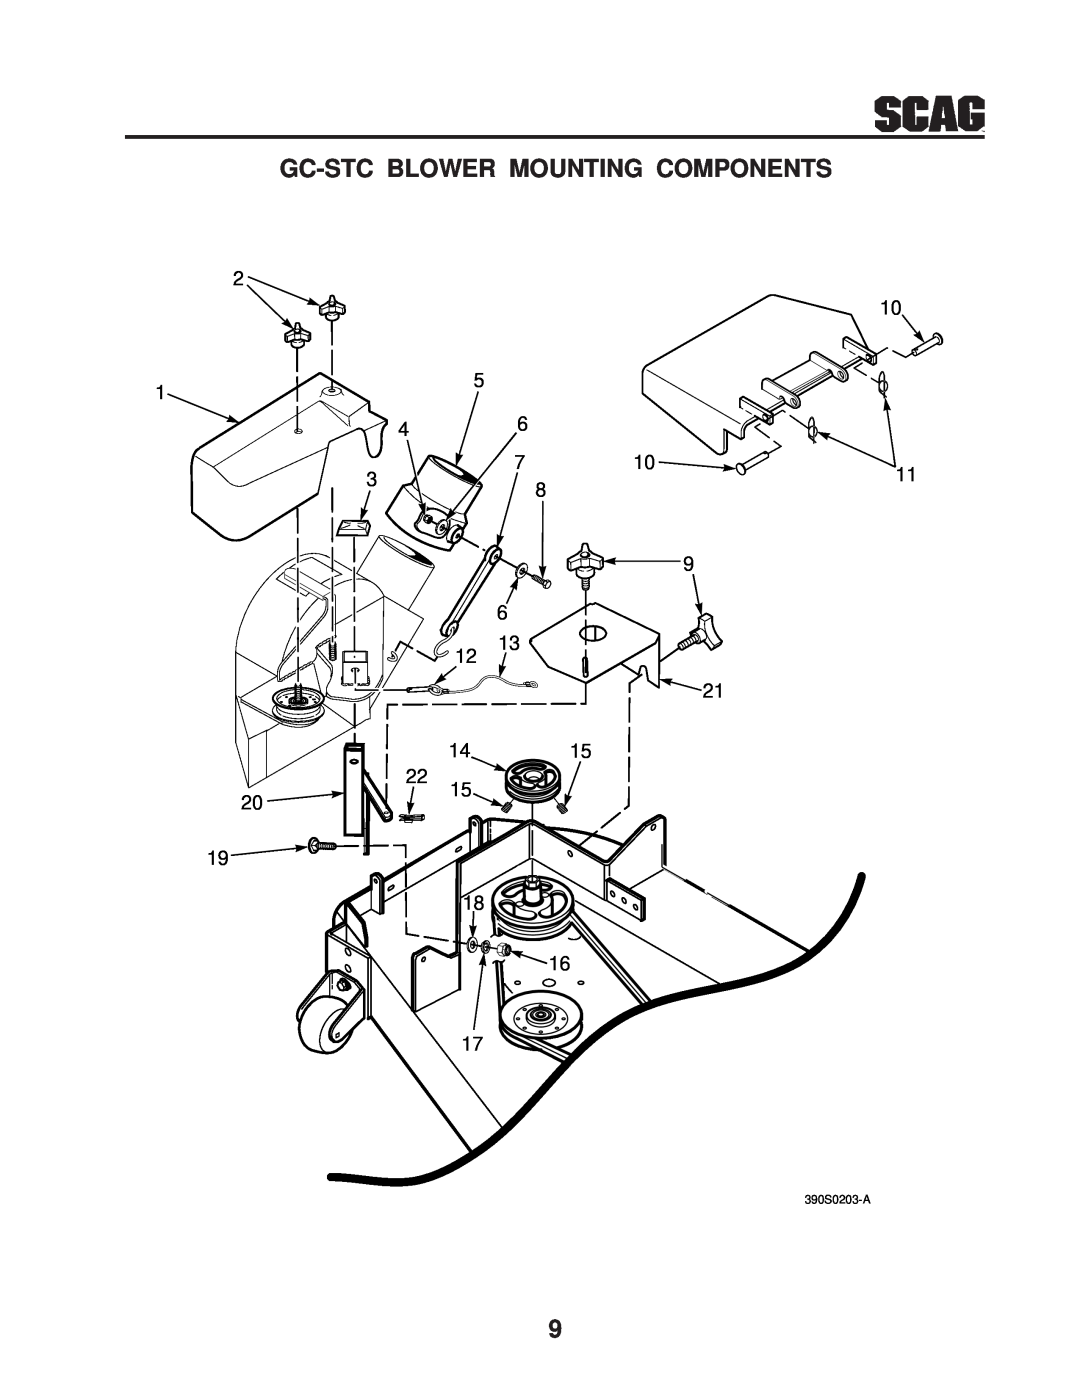 Scag Power Equipment GC-STC manual Gc-Stc Blower Mounting Components, 390S0203-A 